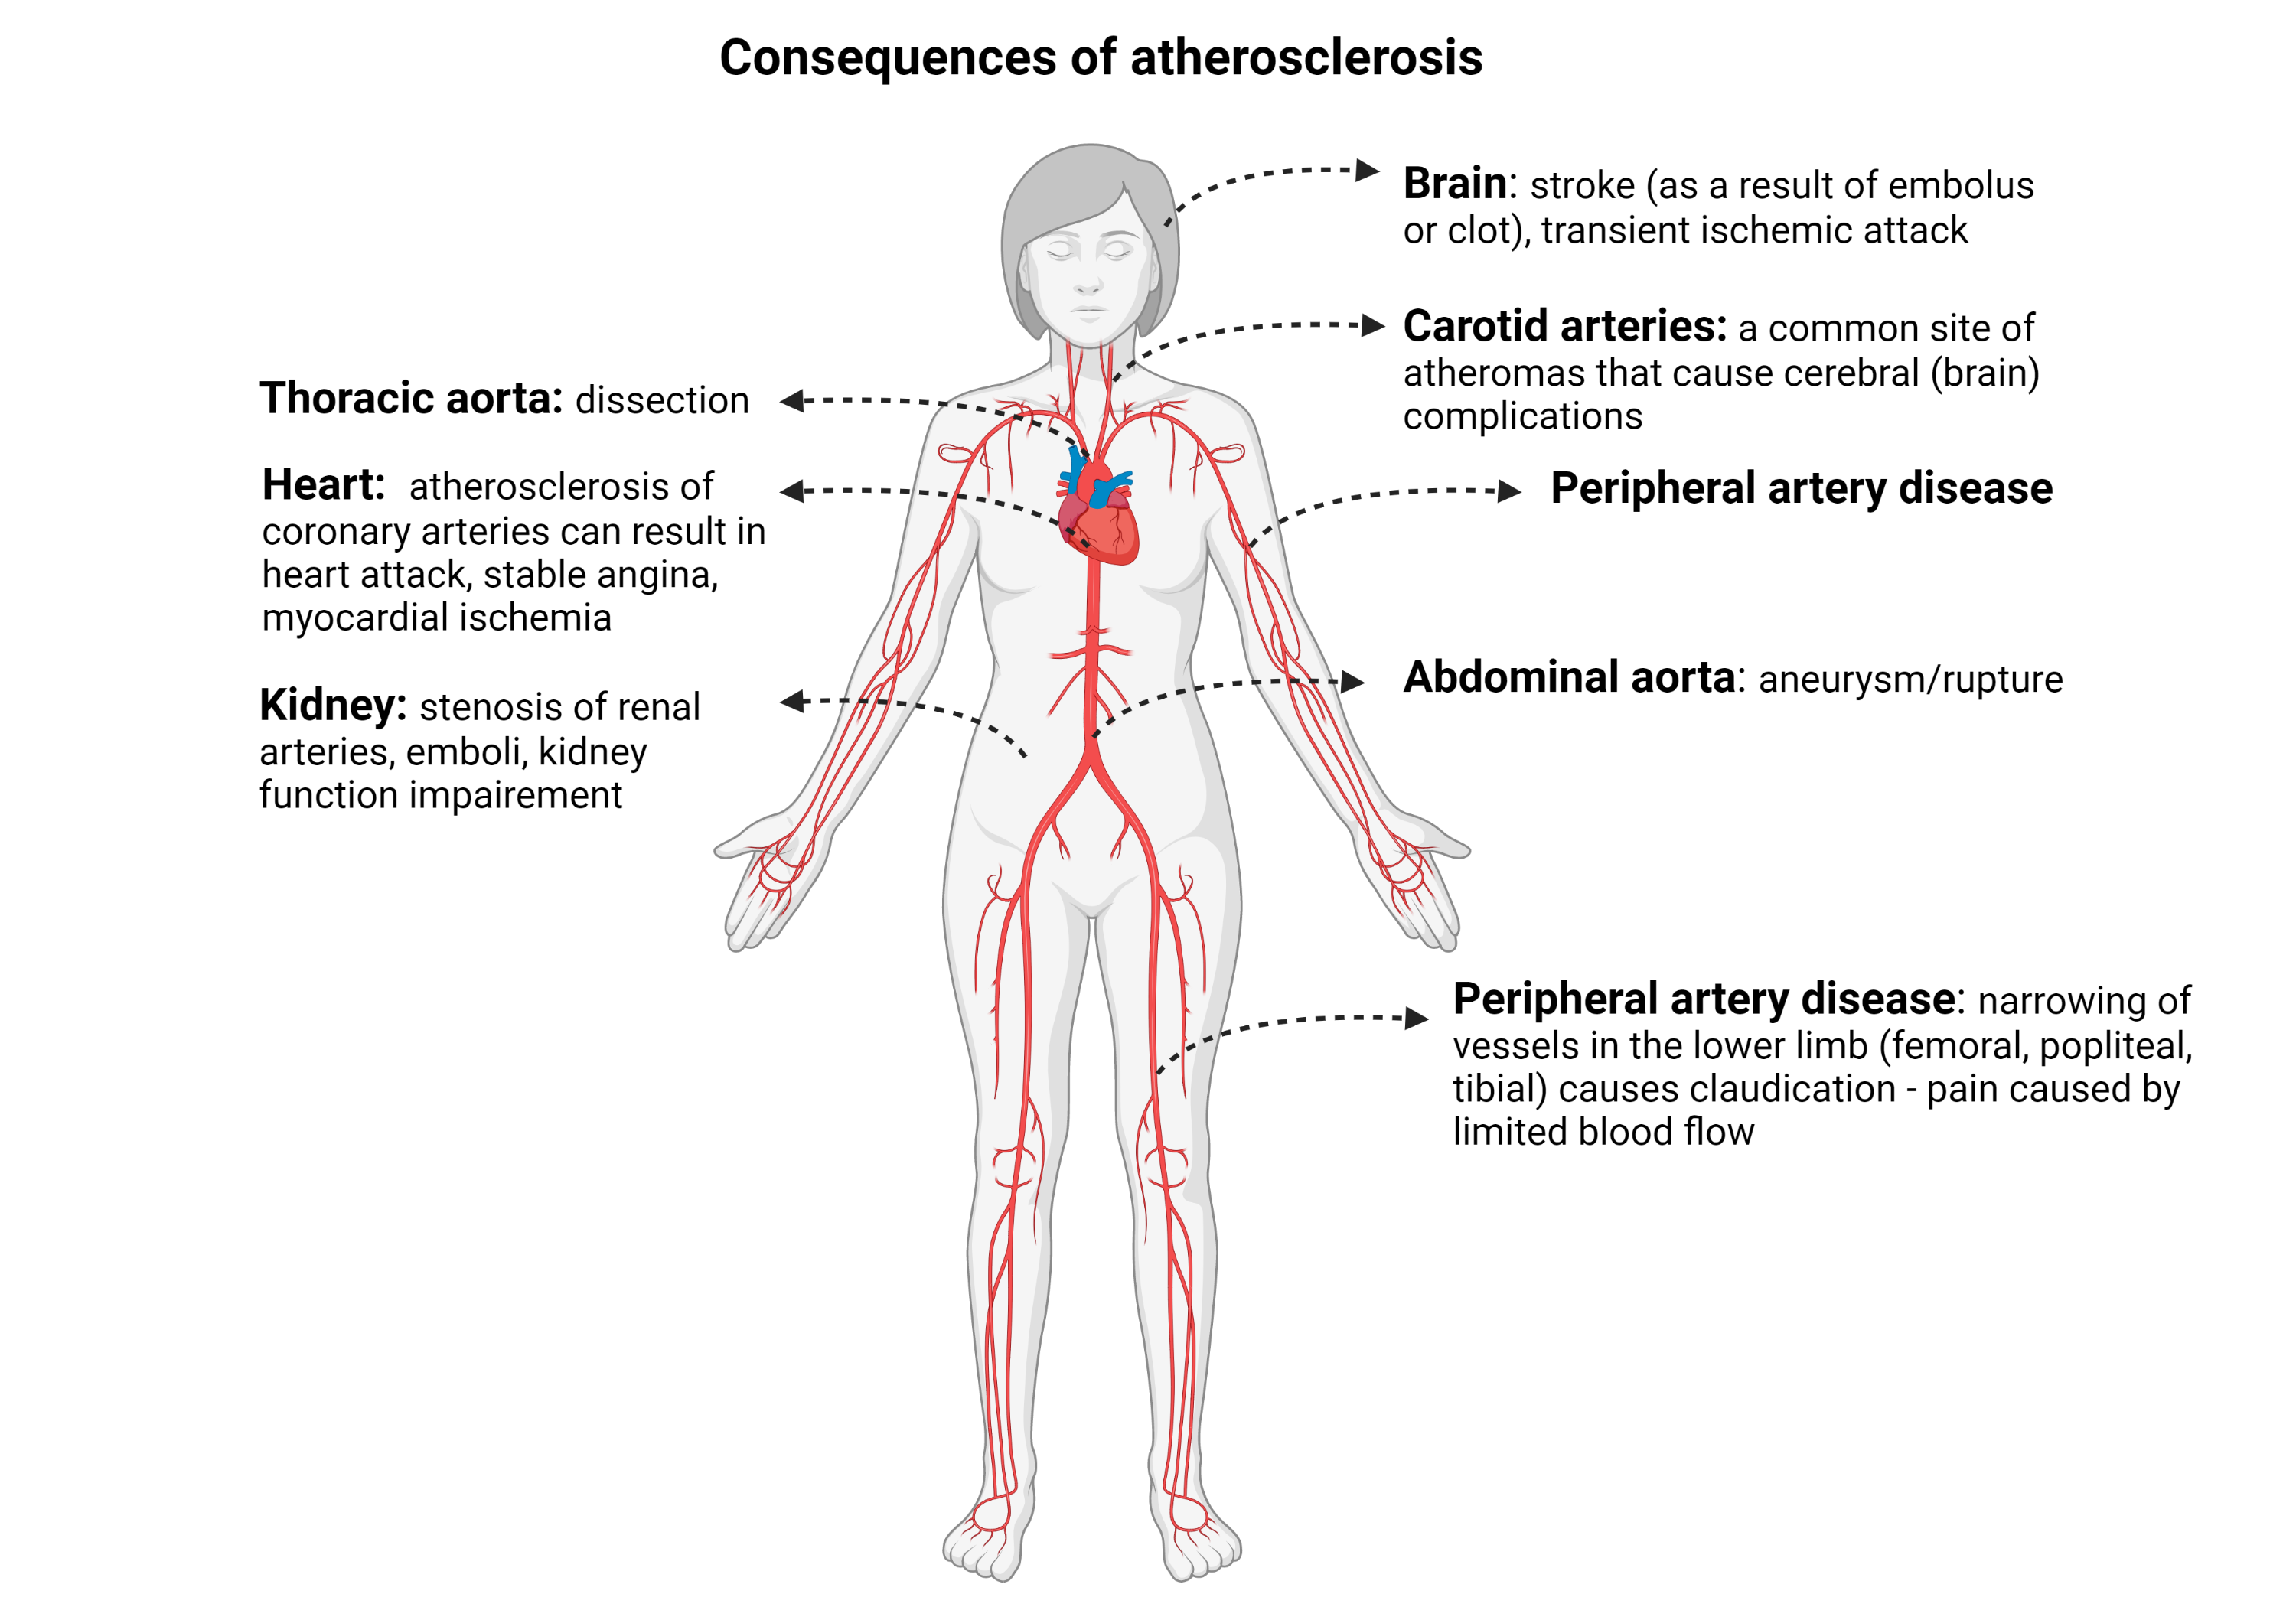 The major arteries of the body are visible with arrows pointing to common areas of atherosclerotic changes: brain, carotid (neck), thoracic (chest), heart, kidney, abdominal, and peripheral arteries (upper & lower limbs)